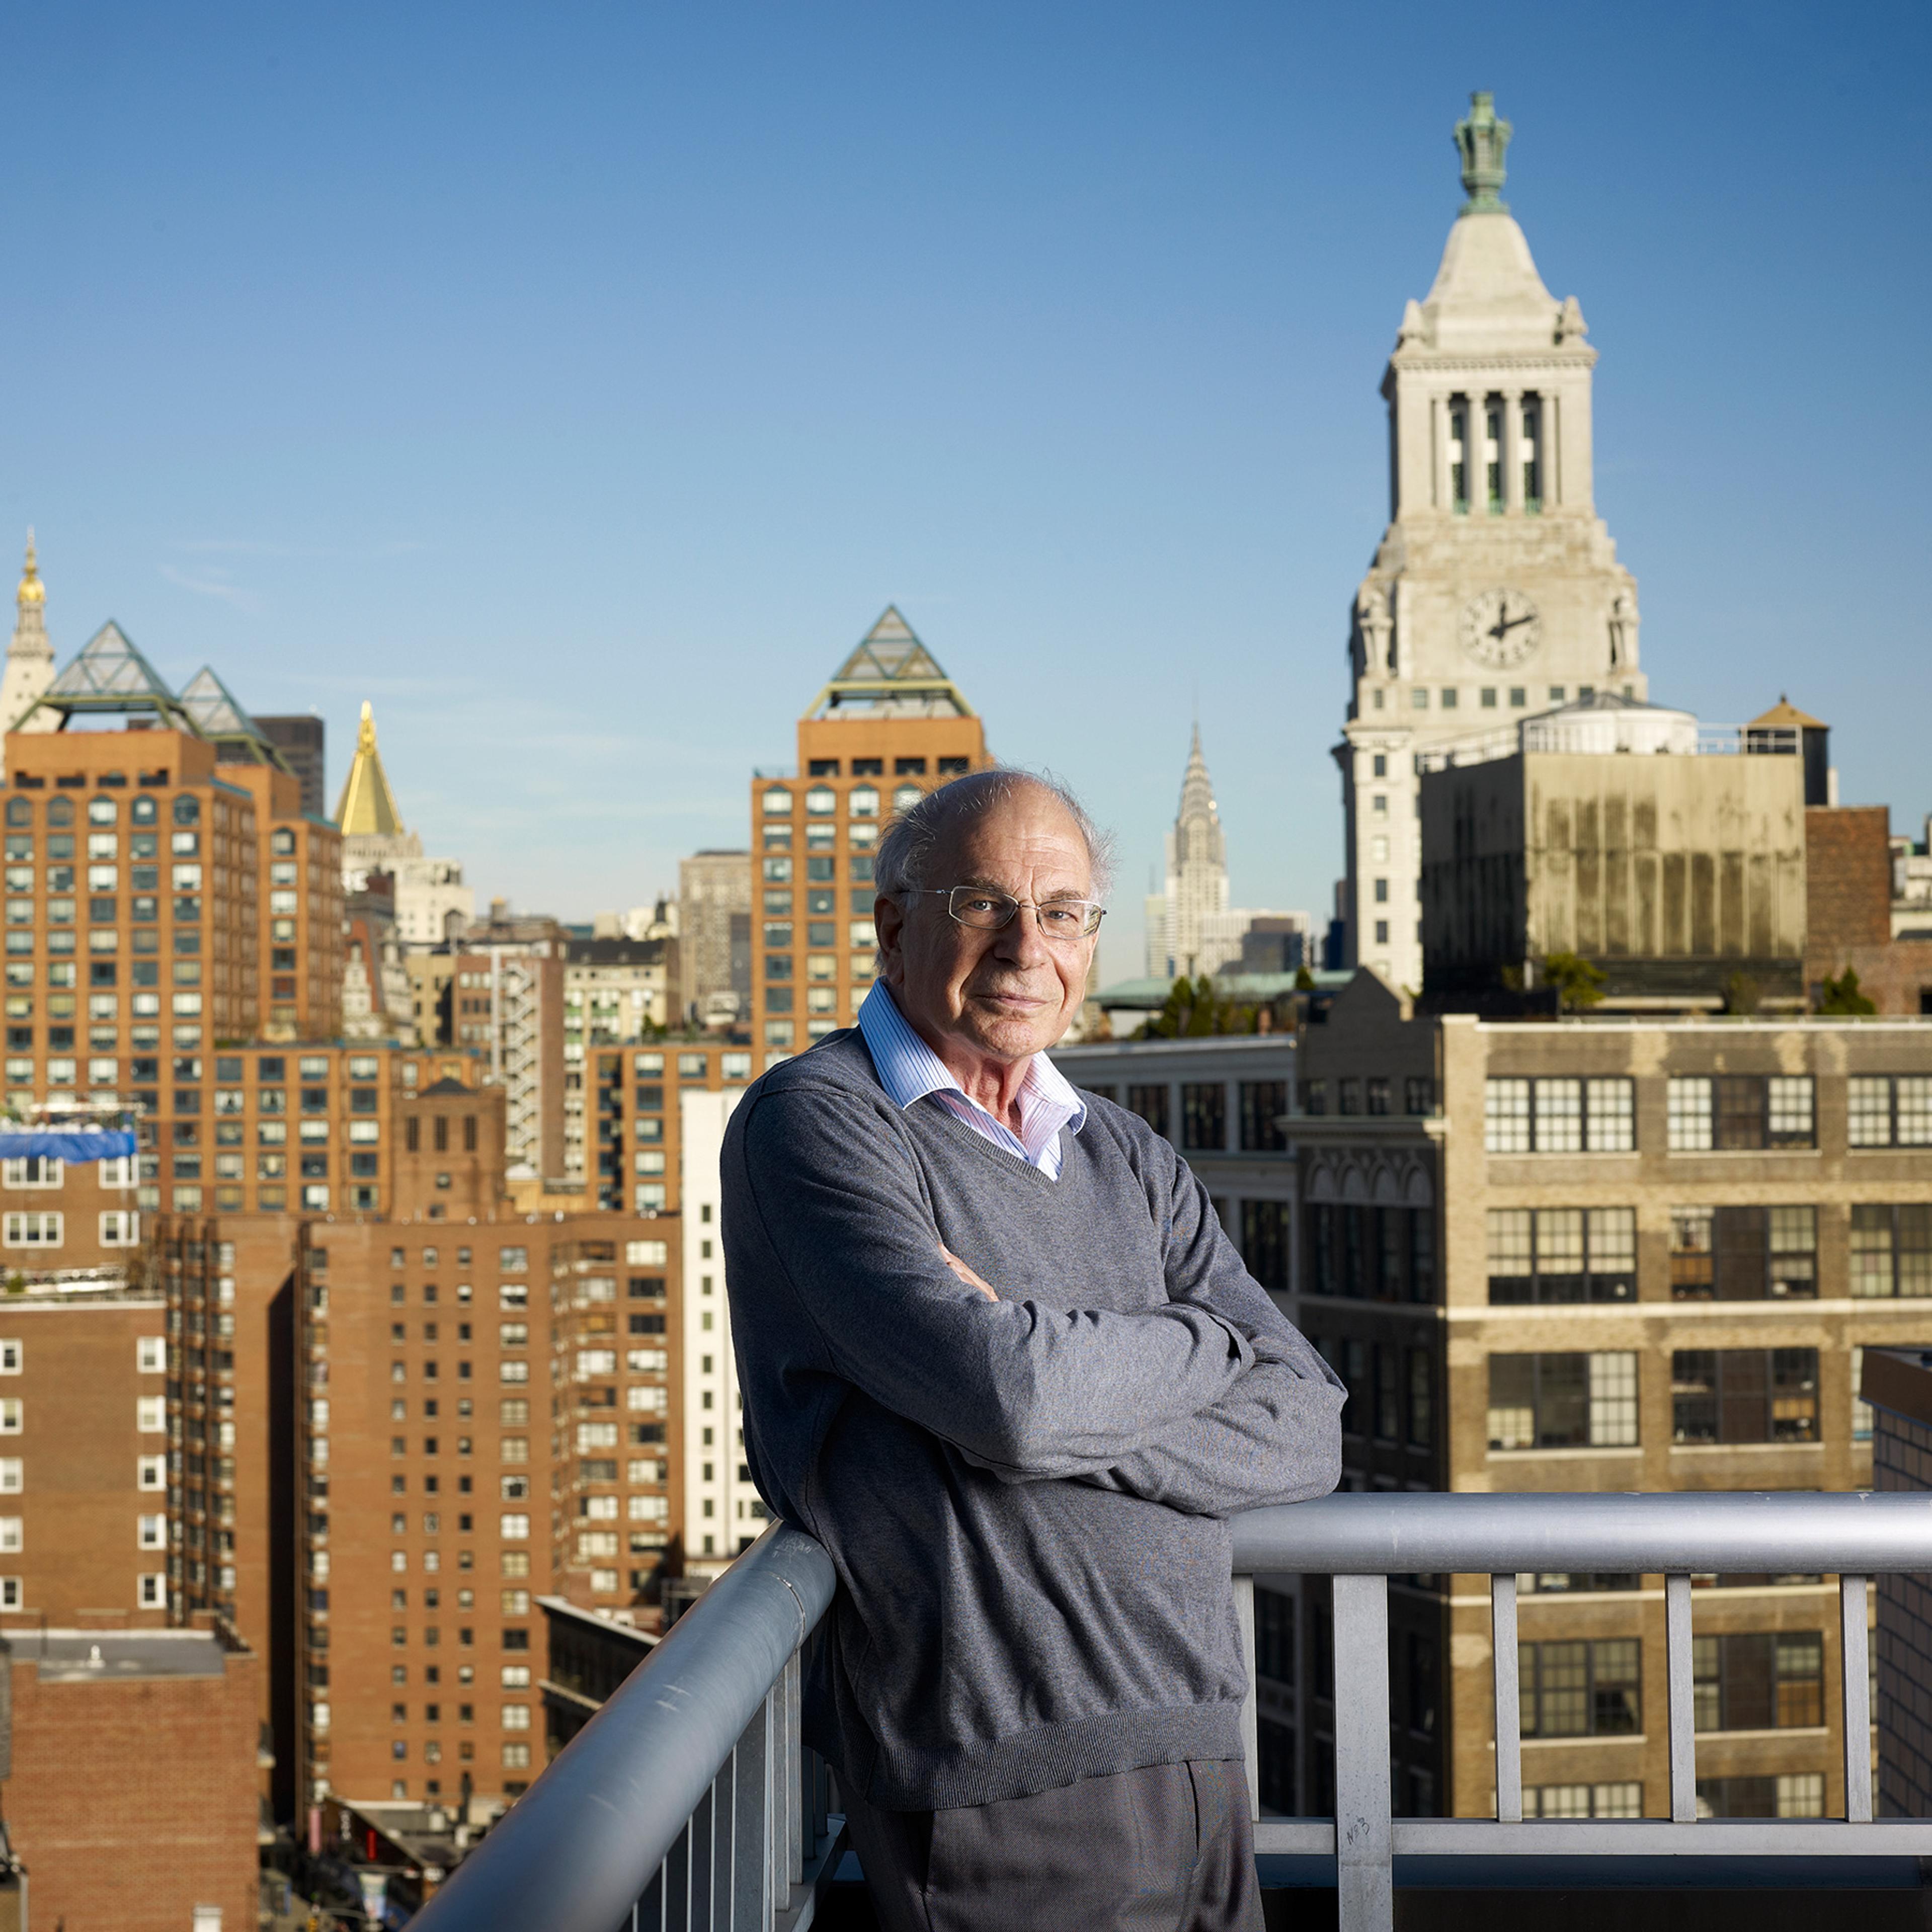 Daniel Kahneman standing on a balcony, arms crossed, with New York City skyline and buildings in the background under a clear blue sky.